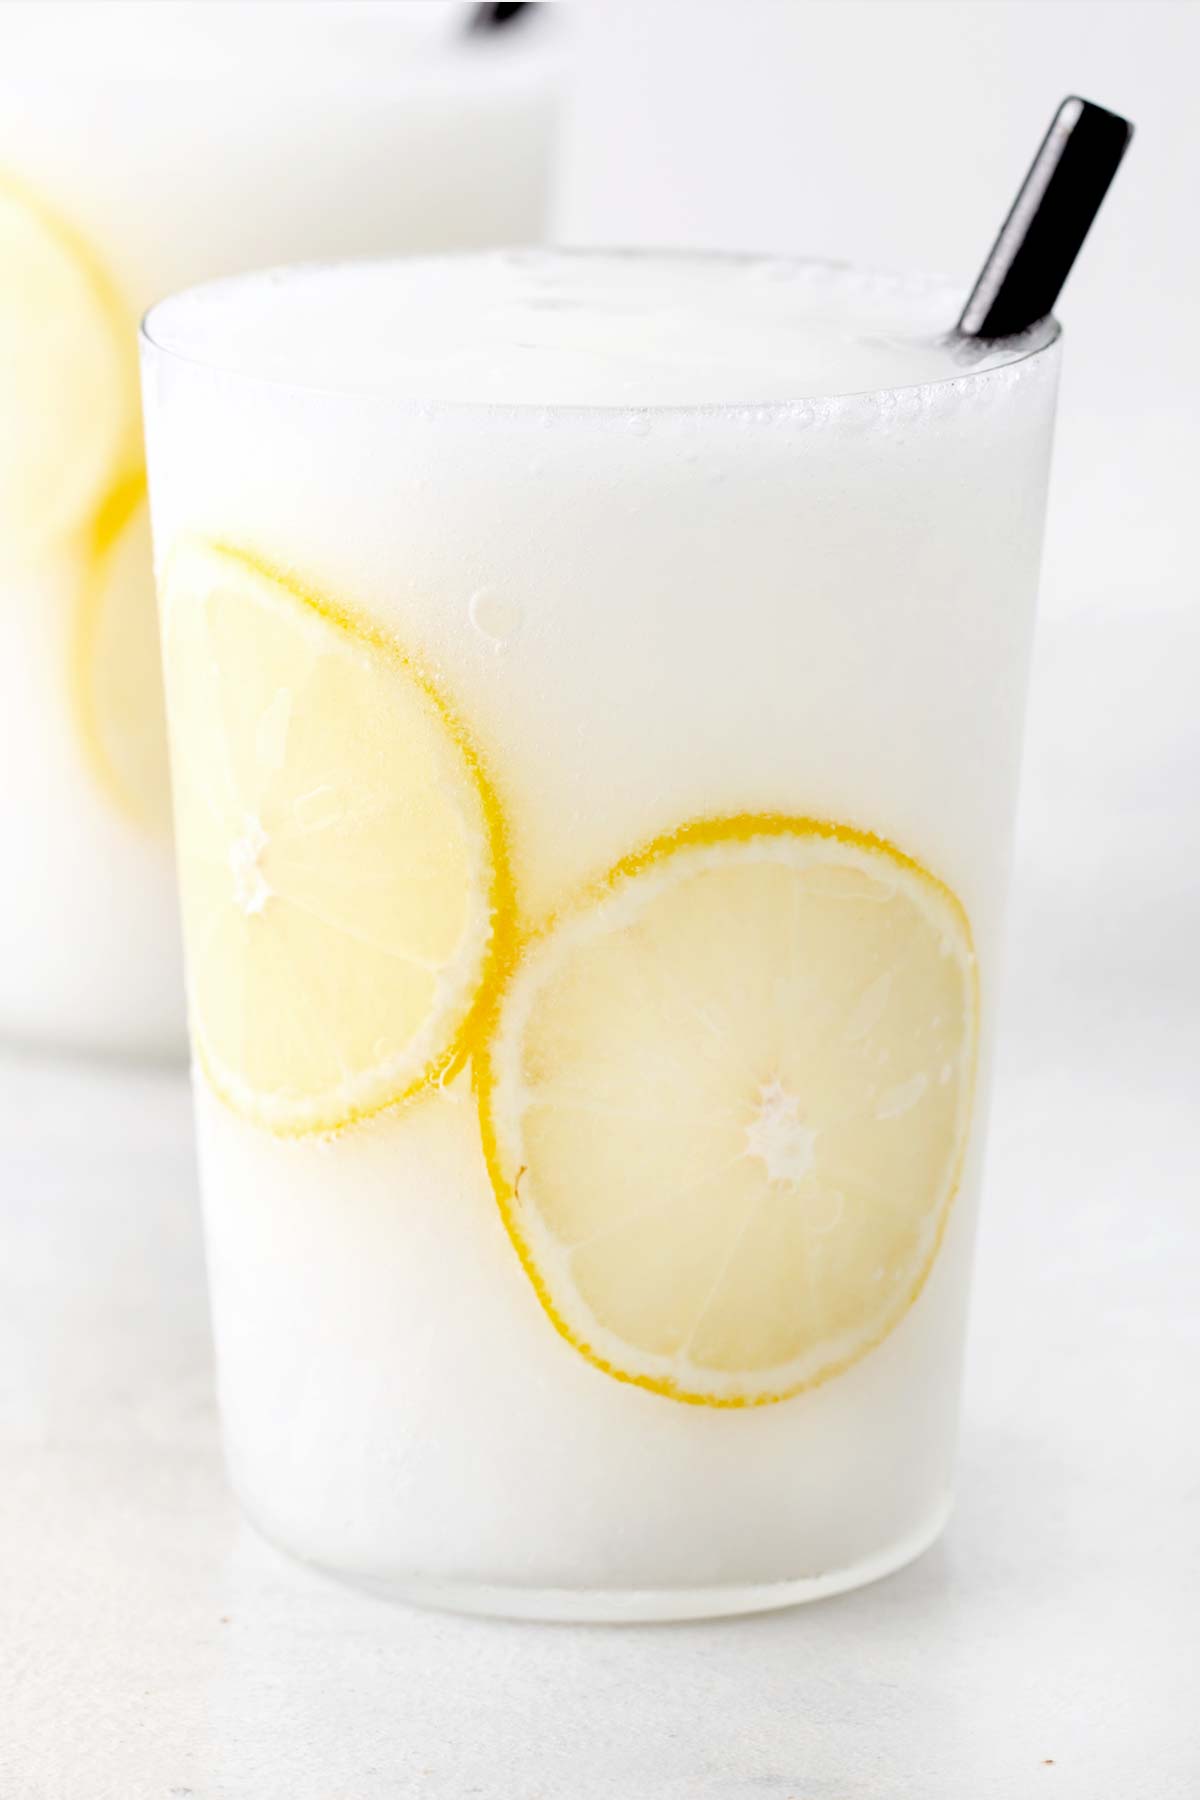 Frozen lemonade in a glass with a black straw.